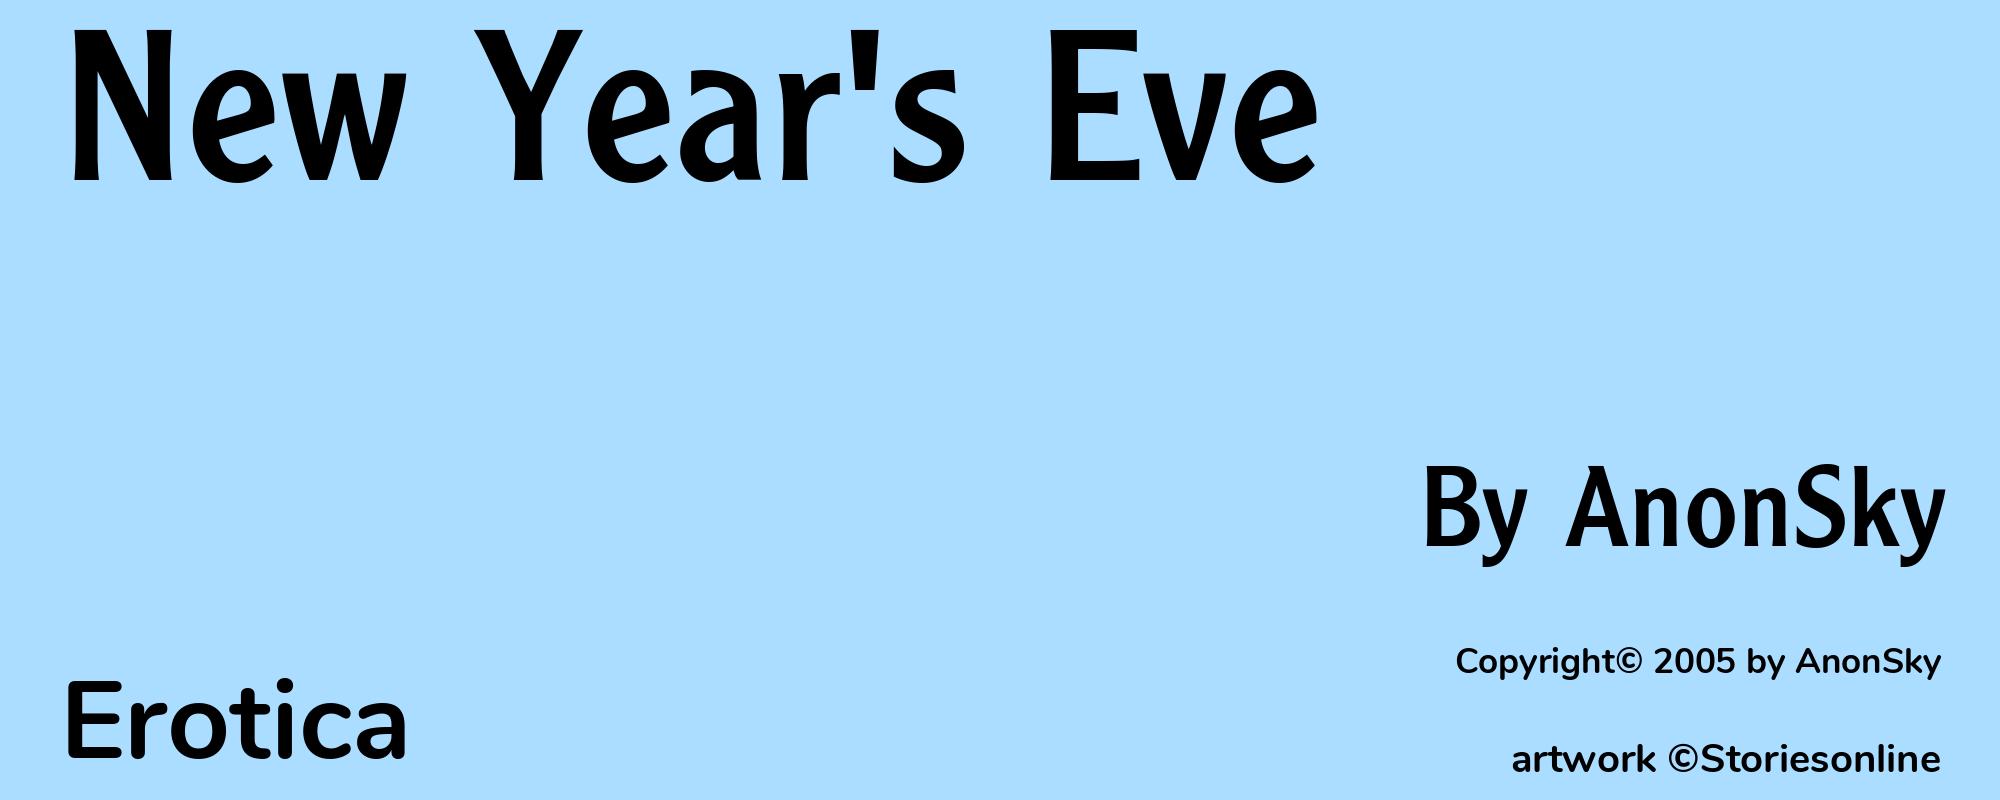 New Year's Eve - Cover